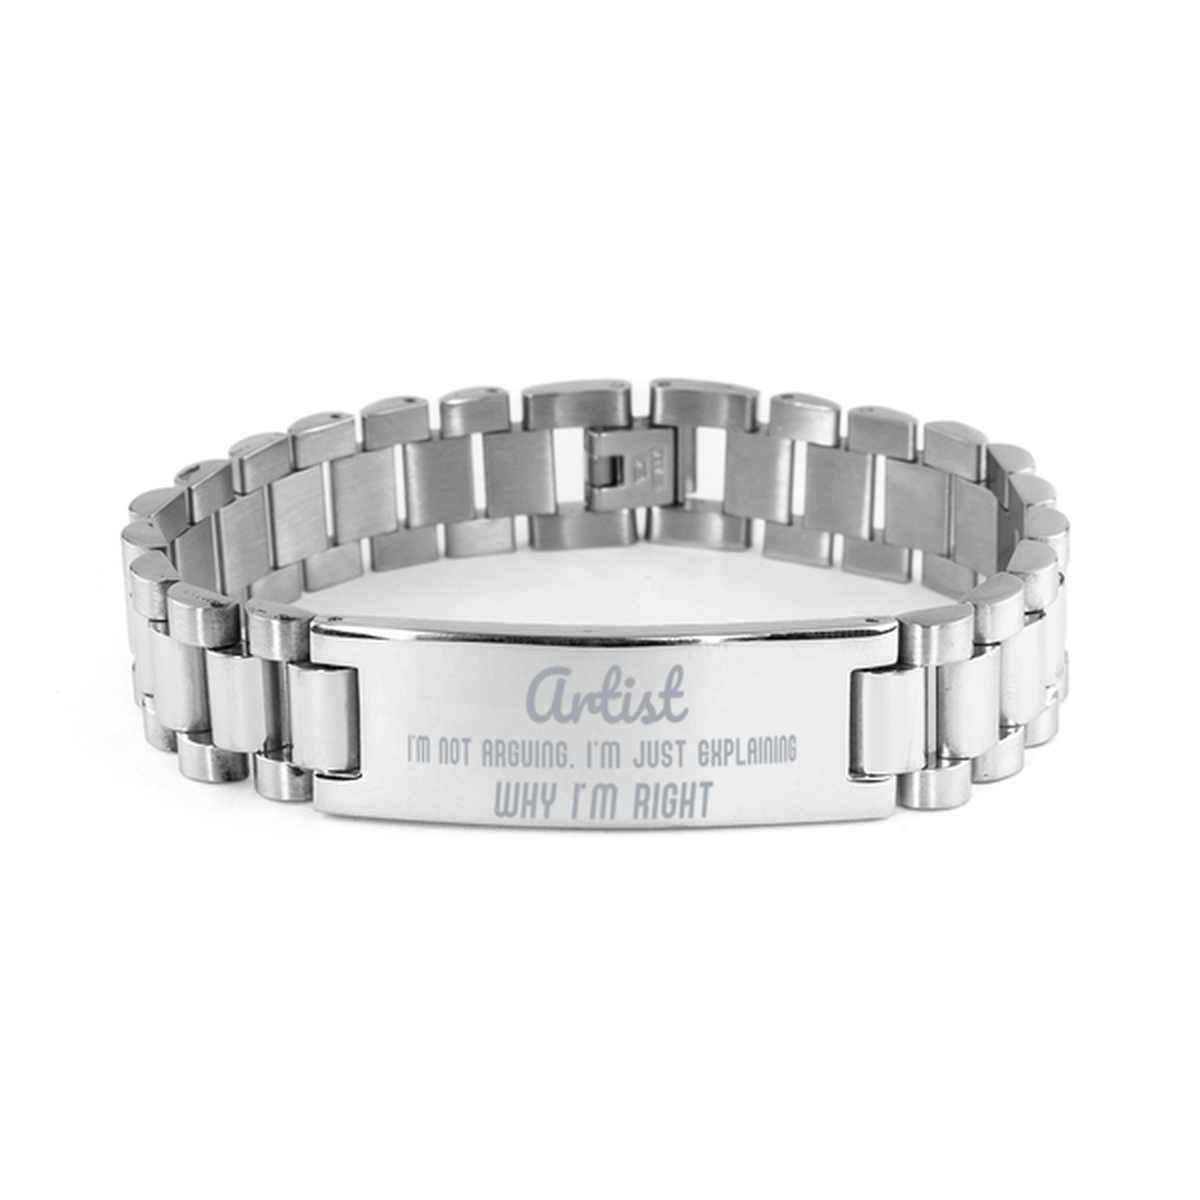 Artist I'm not Arguing. I'm Just Explaining Why I'm RIGHT Ladder Stainless Steel Bracelet, Graduation Birthday Christmas Artist Gifts For Artist Funny Saying Quote Present for Men Women Coworker